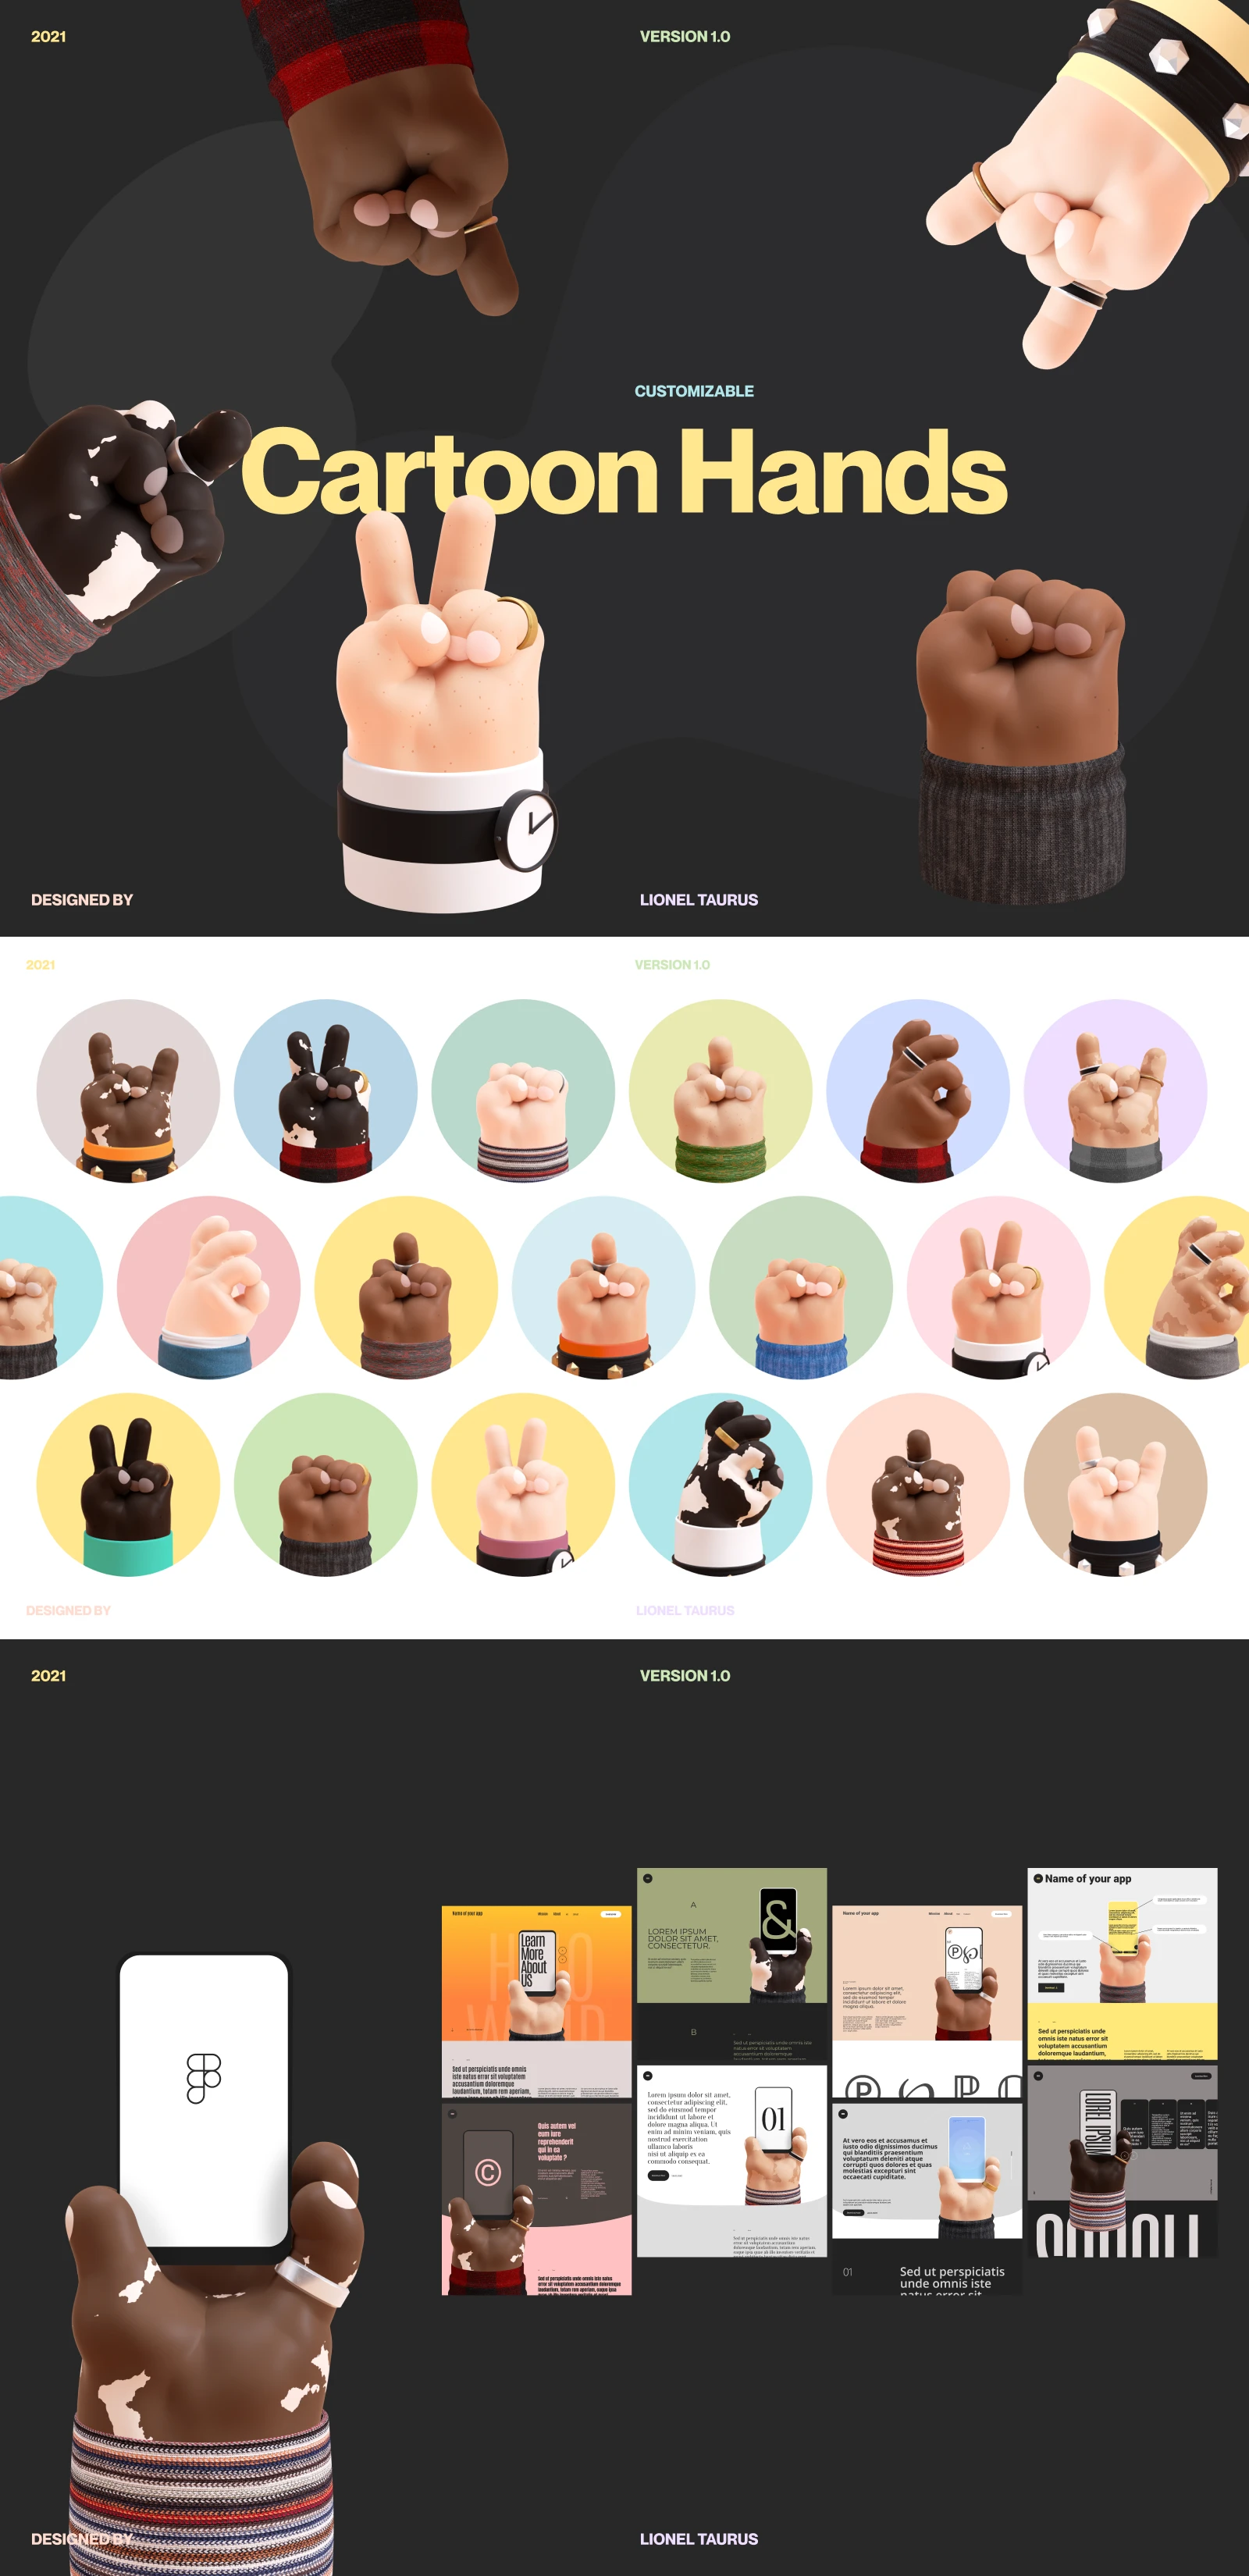 Free 3D Cartoon Hands Mockup for Figma - A collection of 3D cartoon hands, hand-crafted to use for your design and illustrations! The hands are made out of components so you can make your own and create variants.